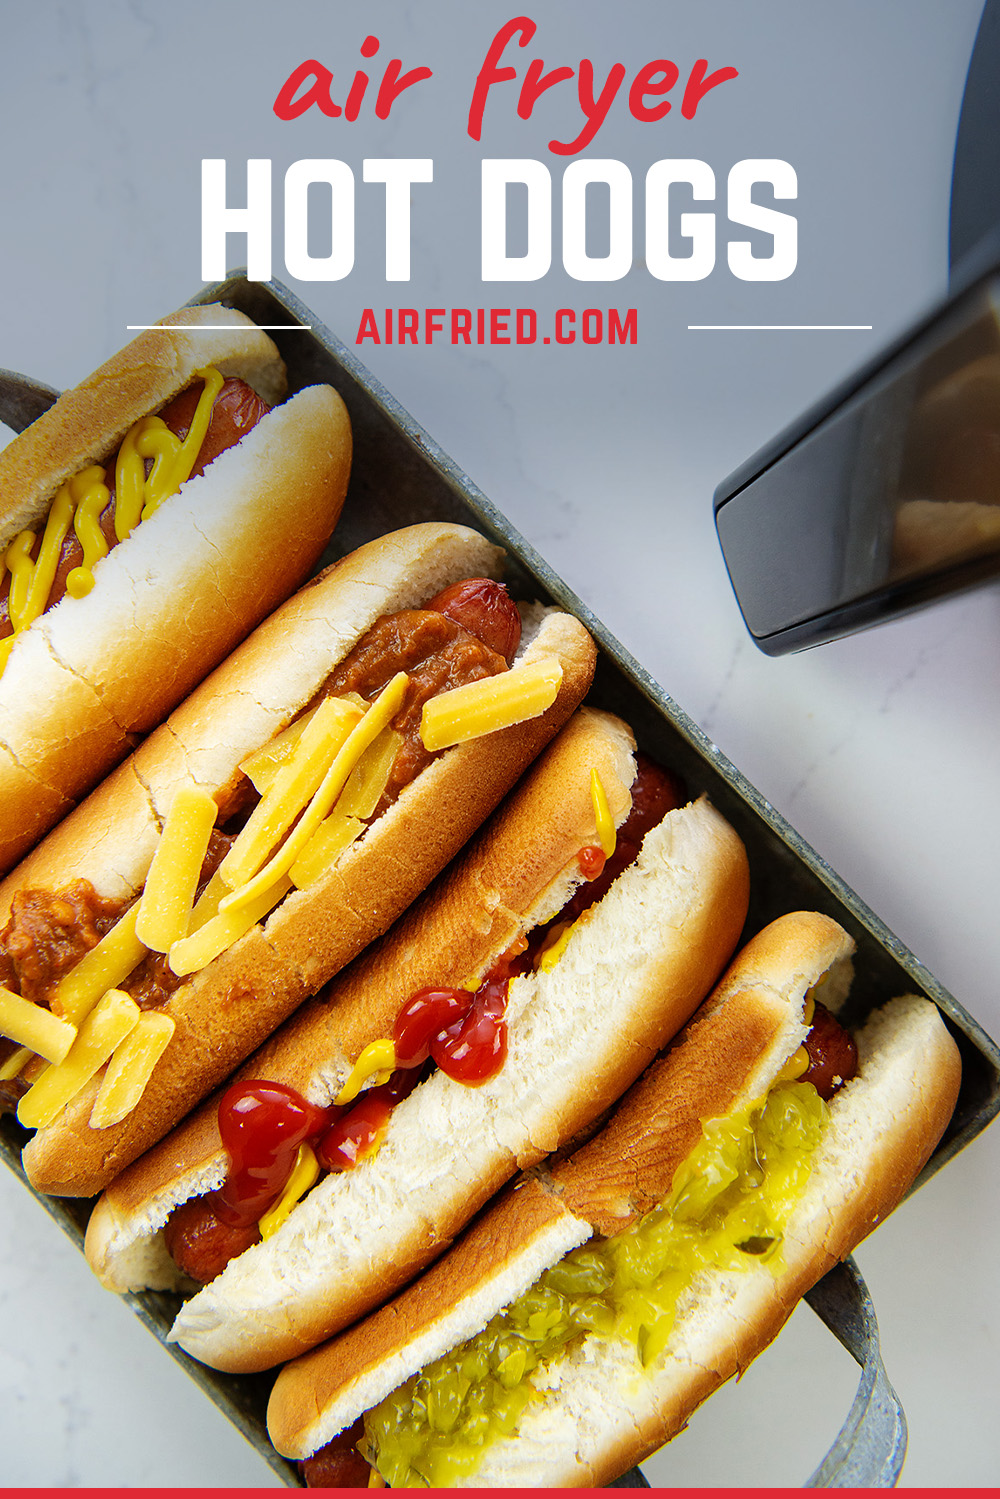 air fried hot dogs in a serving tray